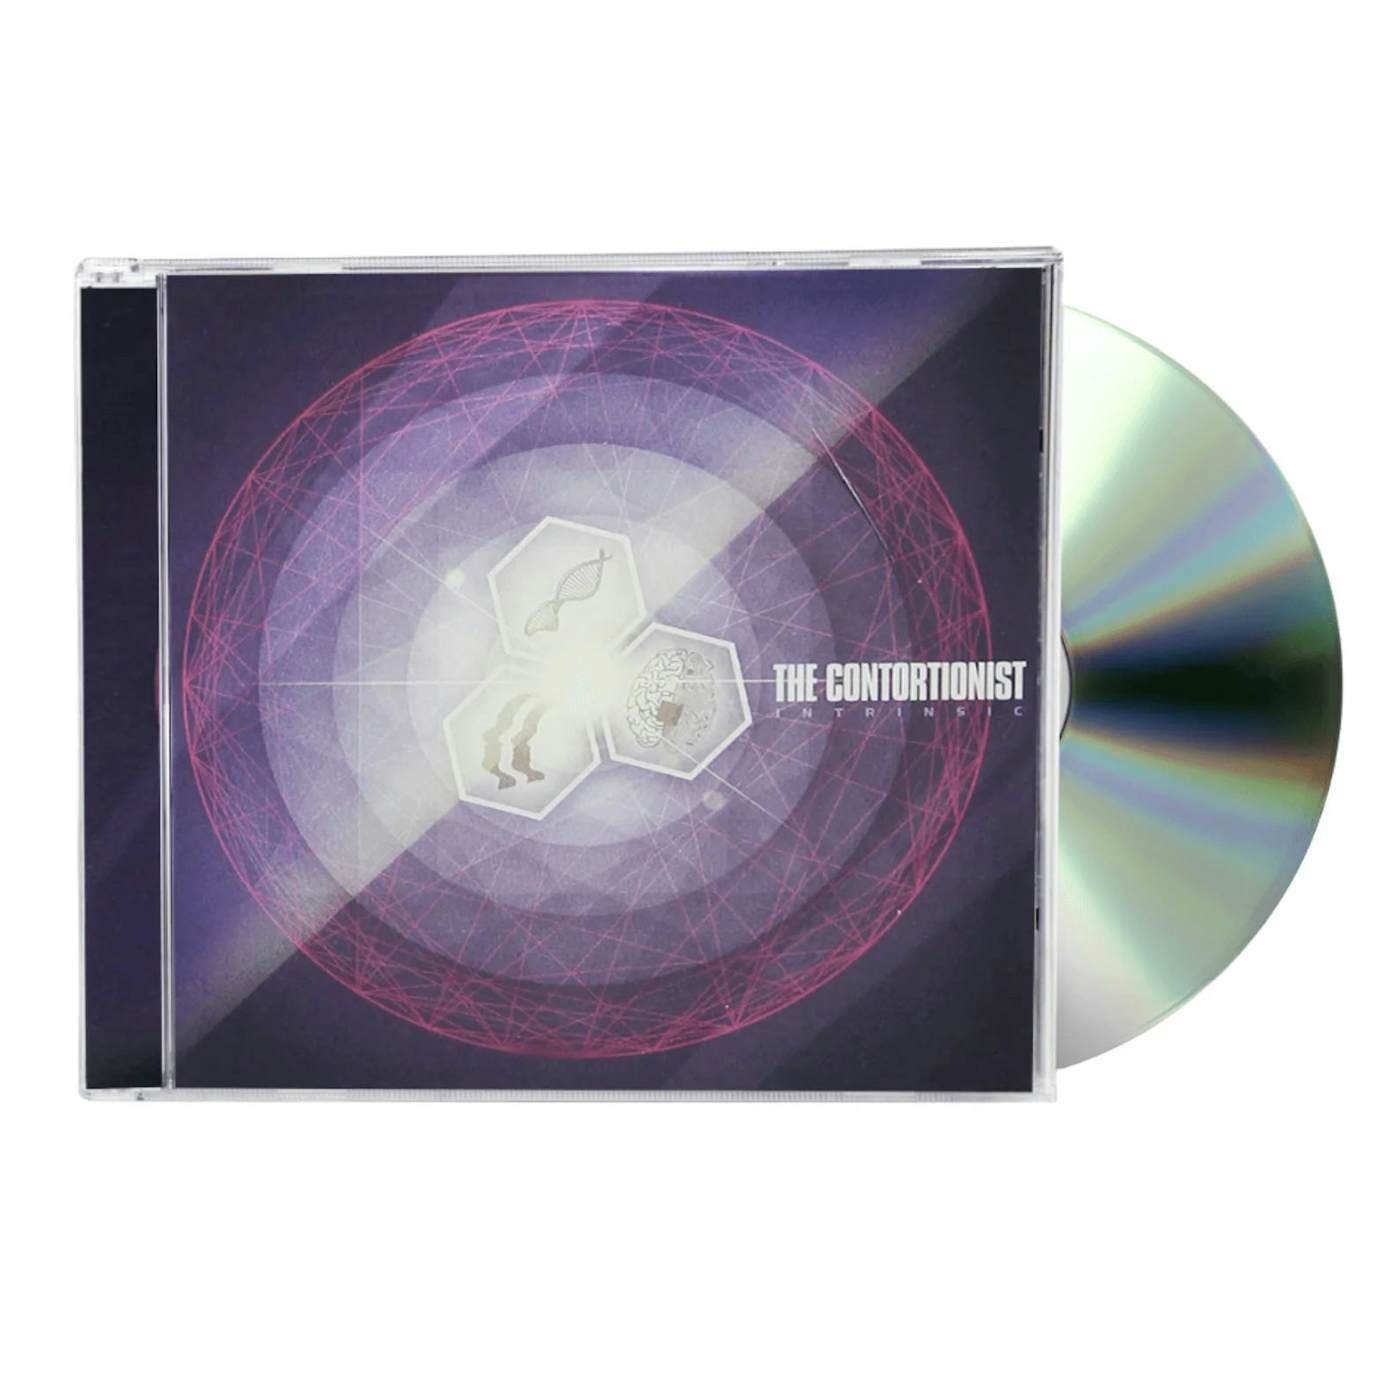 The Contortionist "Intrinsic" CD